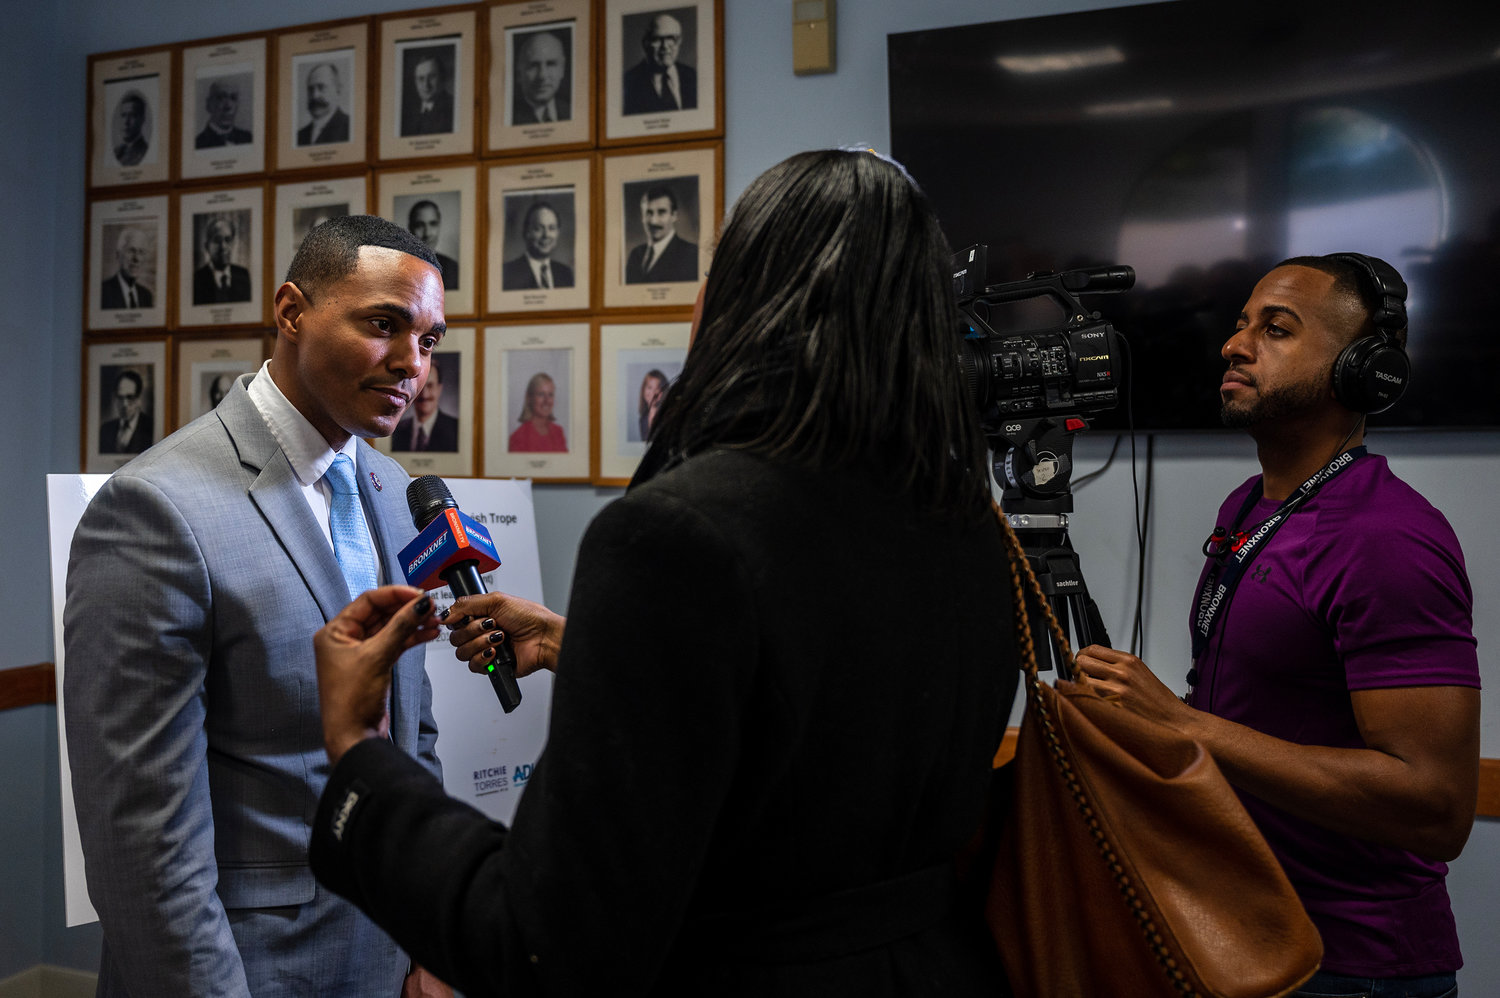 U.S. Rep. Ritchie Torres, who supports the Jewish community, addressed concerns over antisemitism in the country and New York City at the Riverdale Y on Monday. Torres announced a $300 million federal grant to be put toward the nonprofit security grant program that encourages synagogues and Jewish day schools to apply.